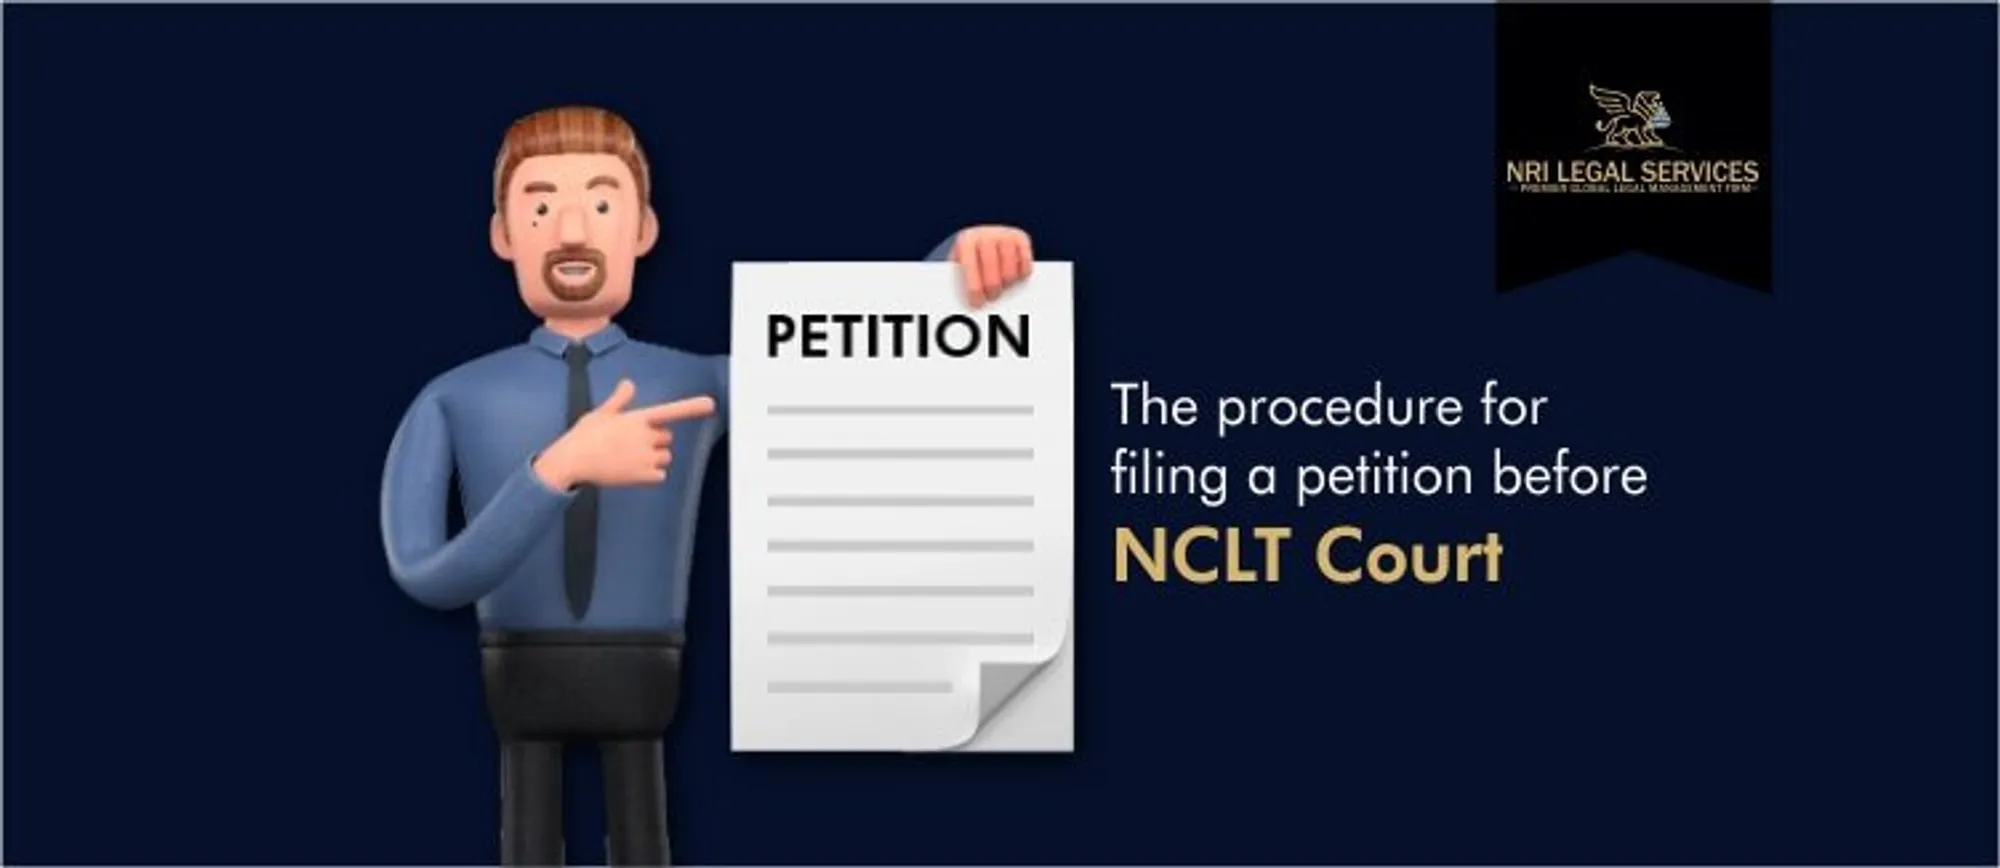 The procedure for filing a petition before NCLT court